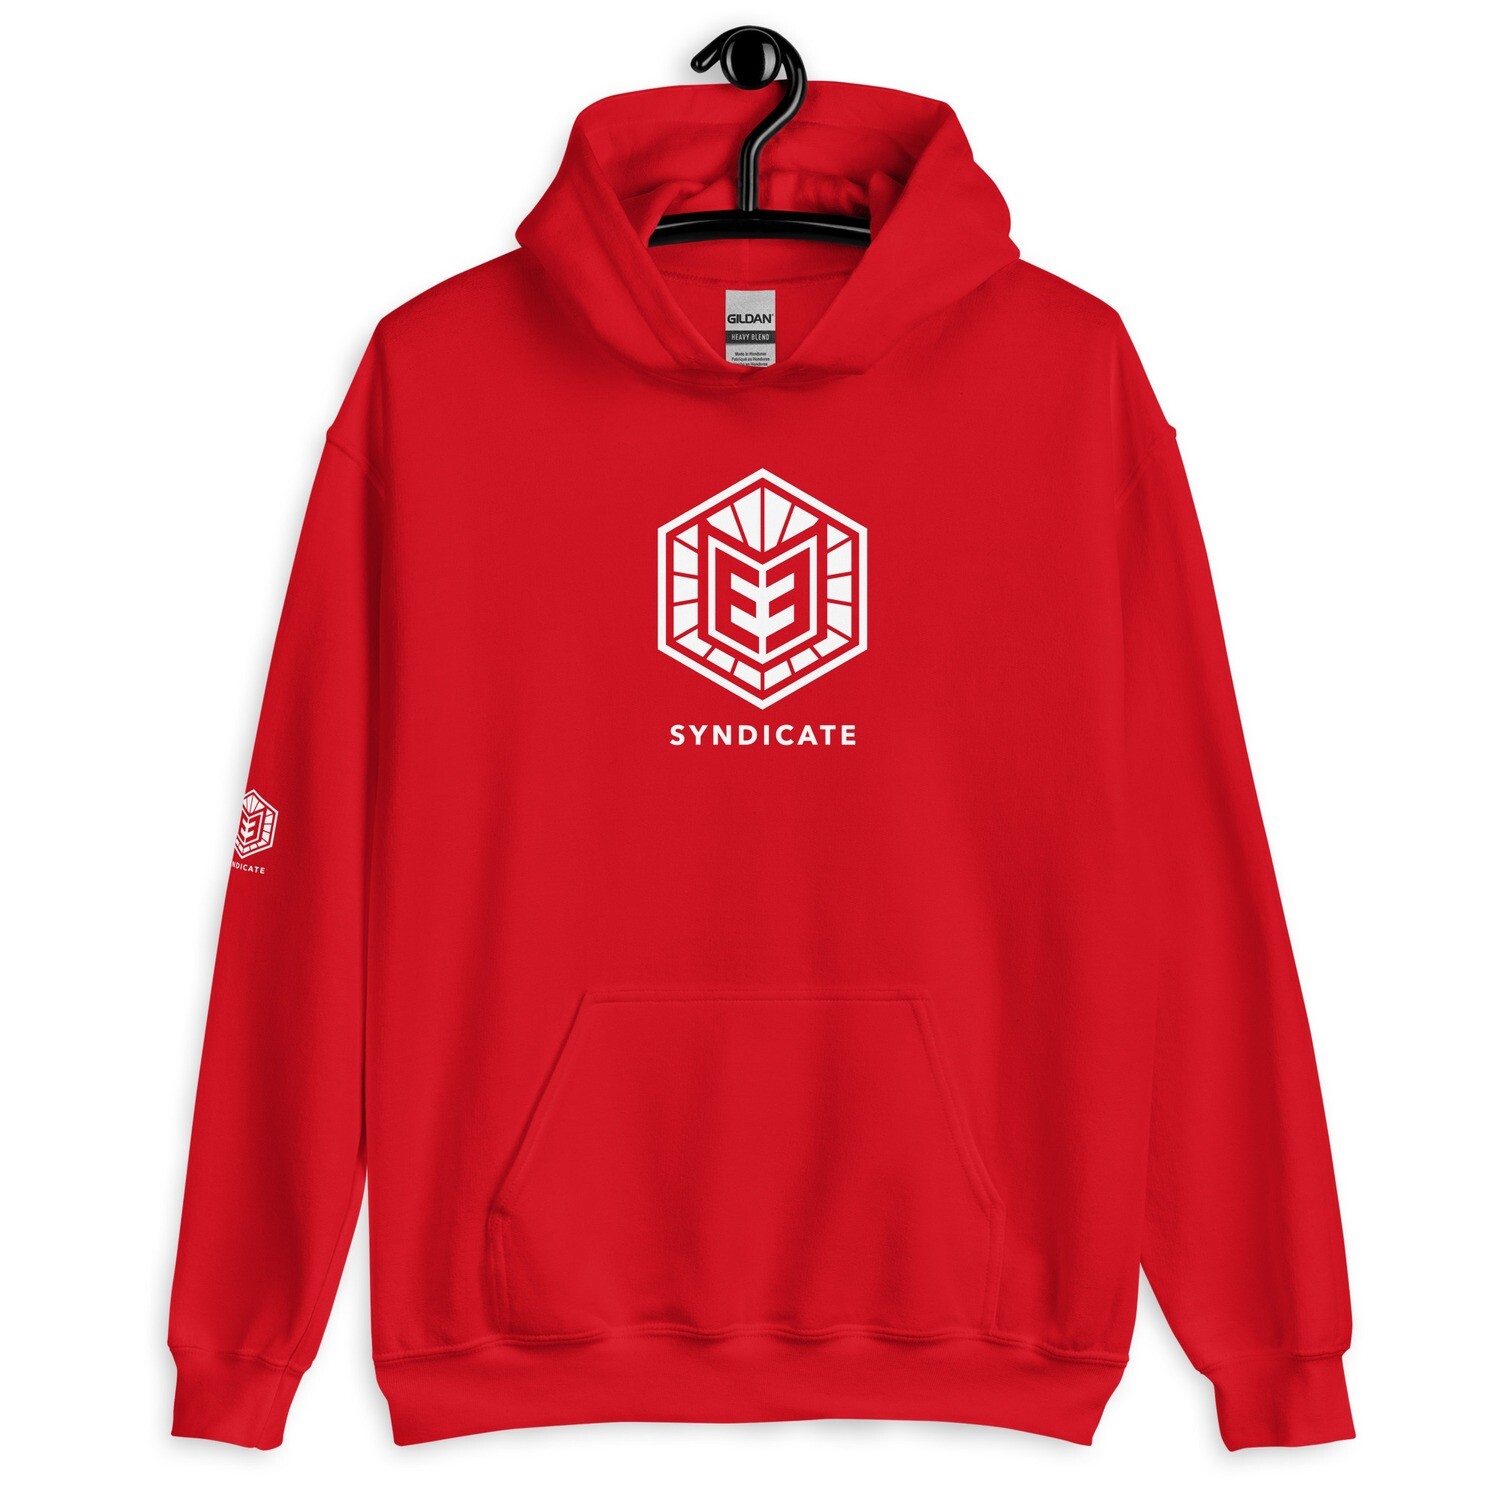 Unisex Hoodie- White E3 Logo on Front and Right Sleeve